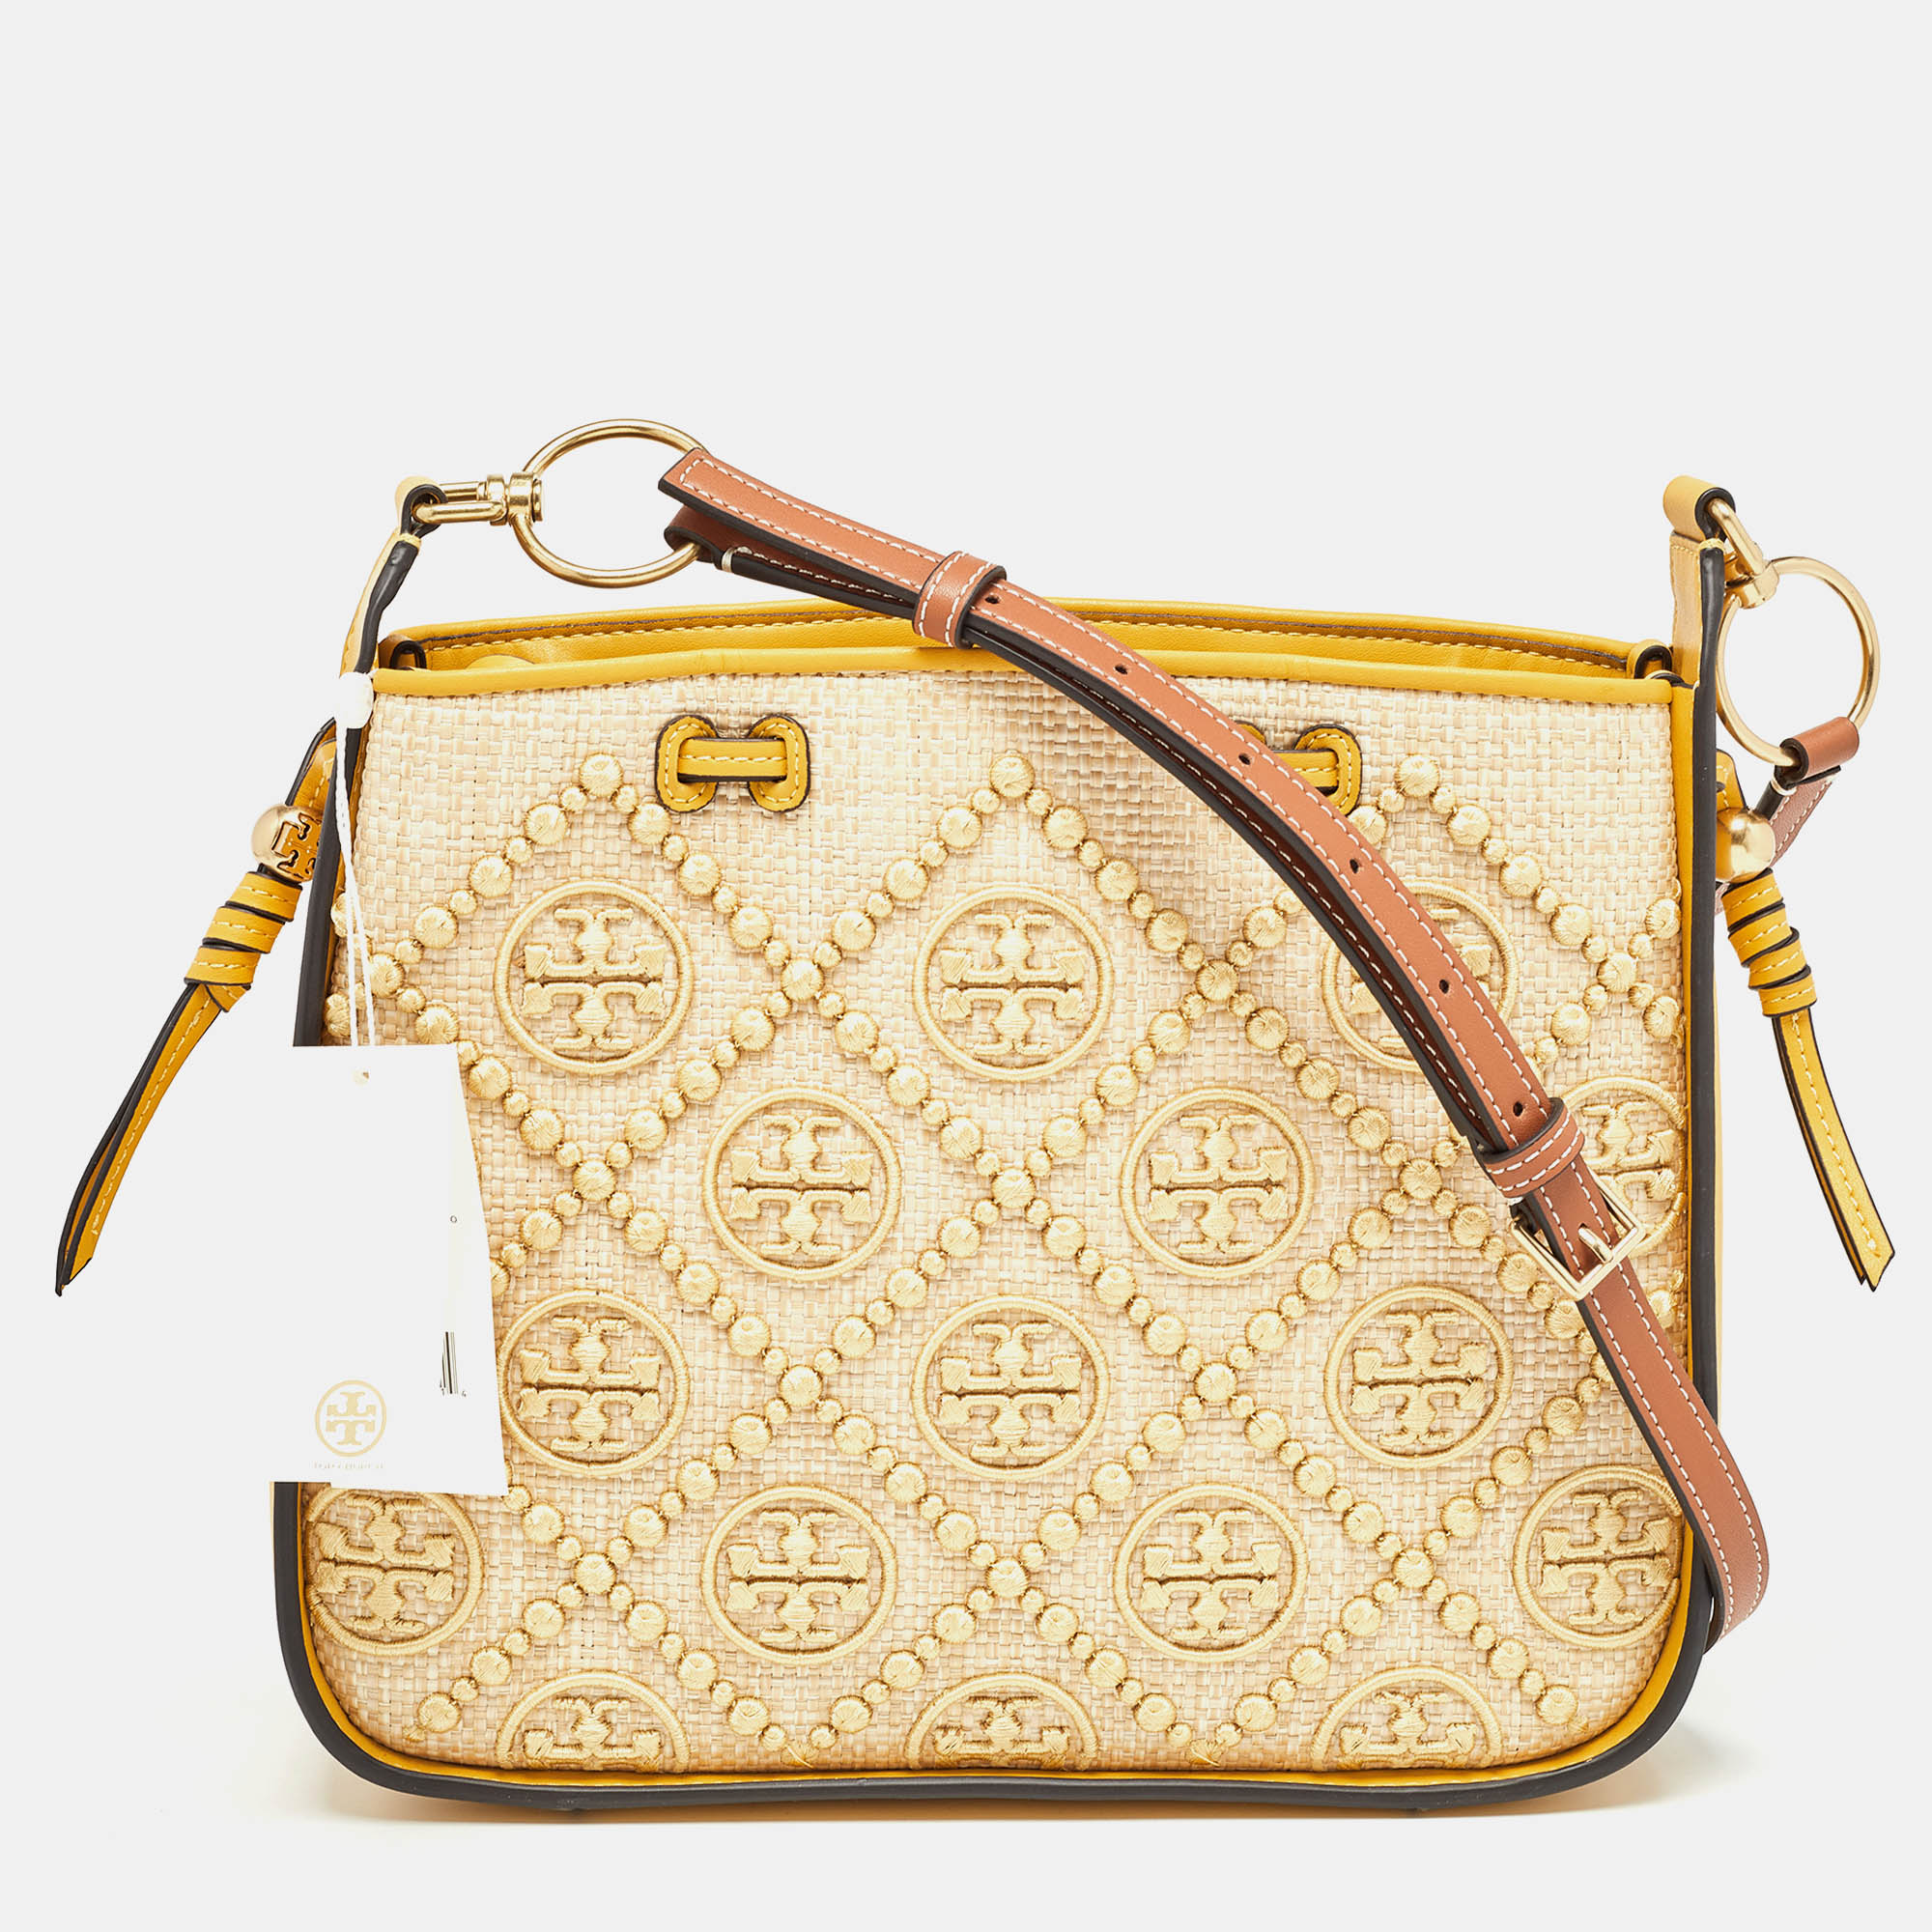 Tory burch mustard t monogram straw and leather bell shoulder bag